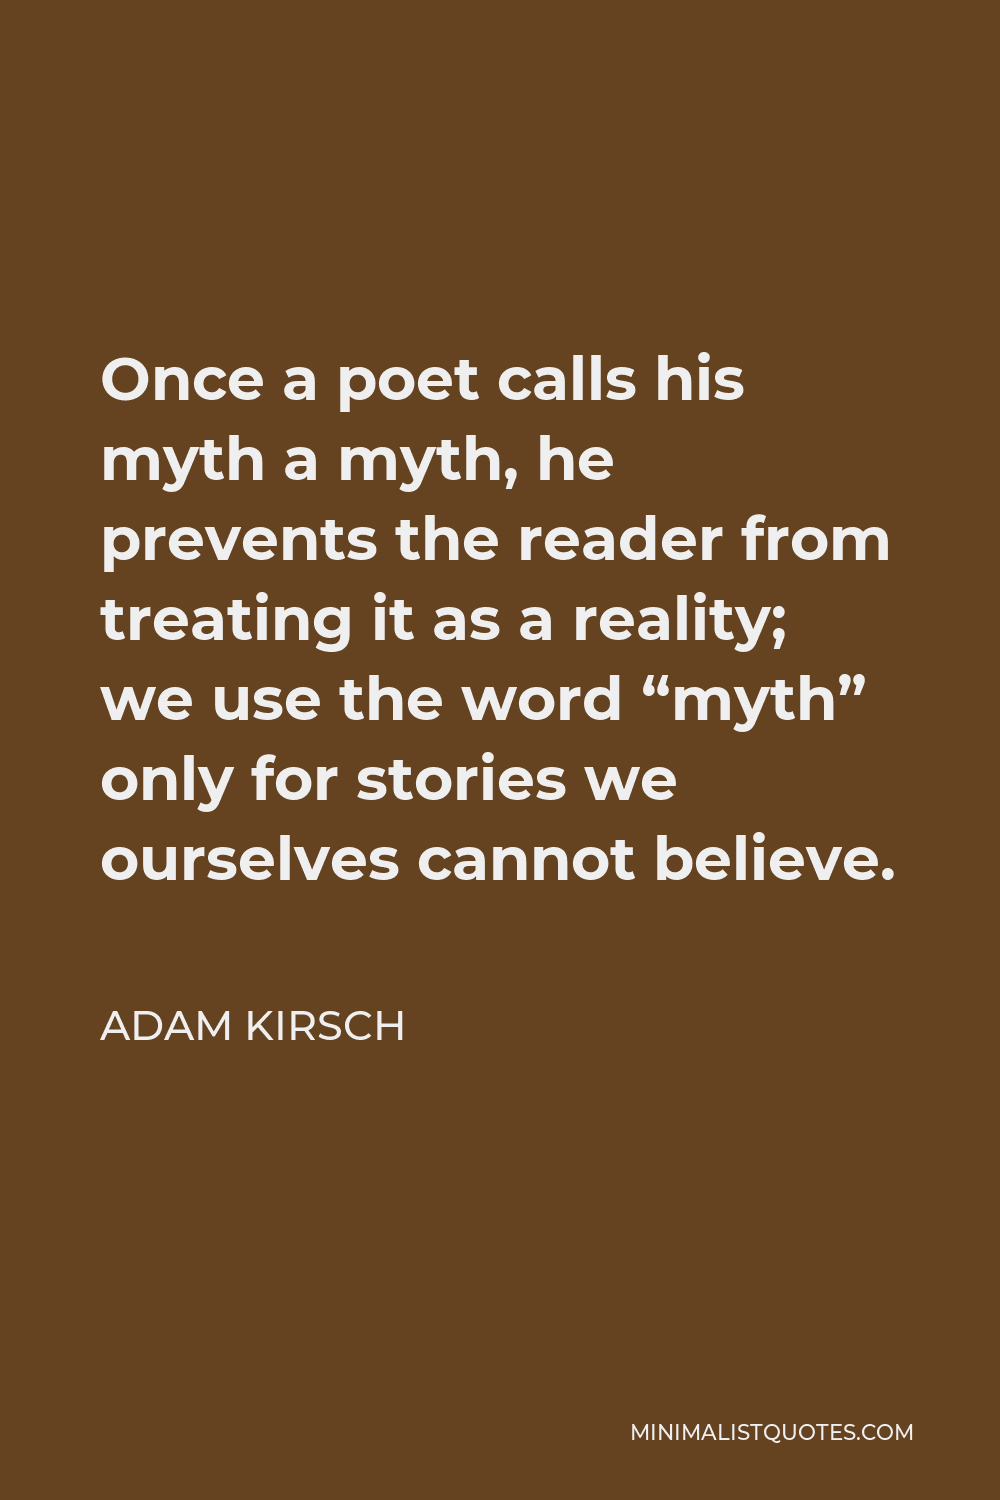 Adam Kirsch Quote - Once a poet calls his myth a myth, he prevents the reader from treating it as a reality; we use the word “myth” only for stories we ourselves cannot believe.